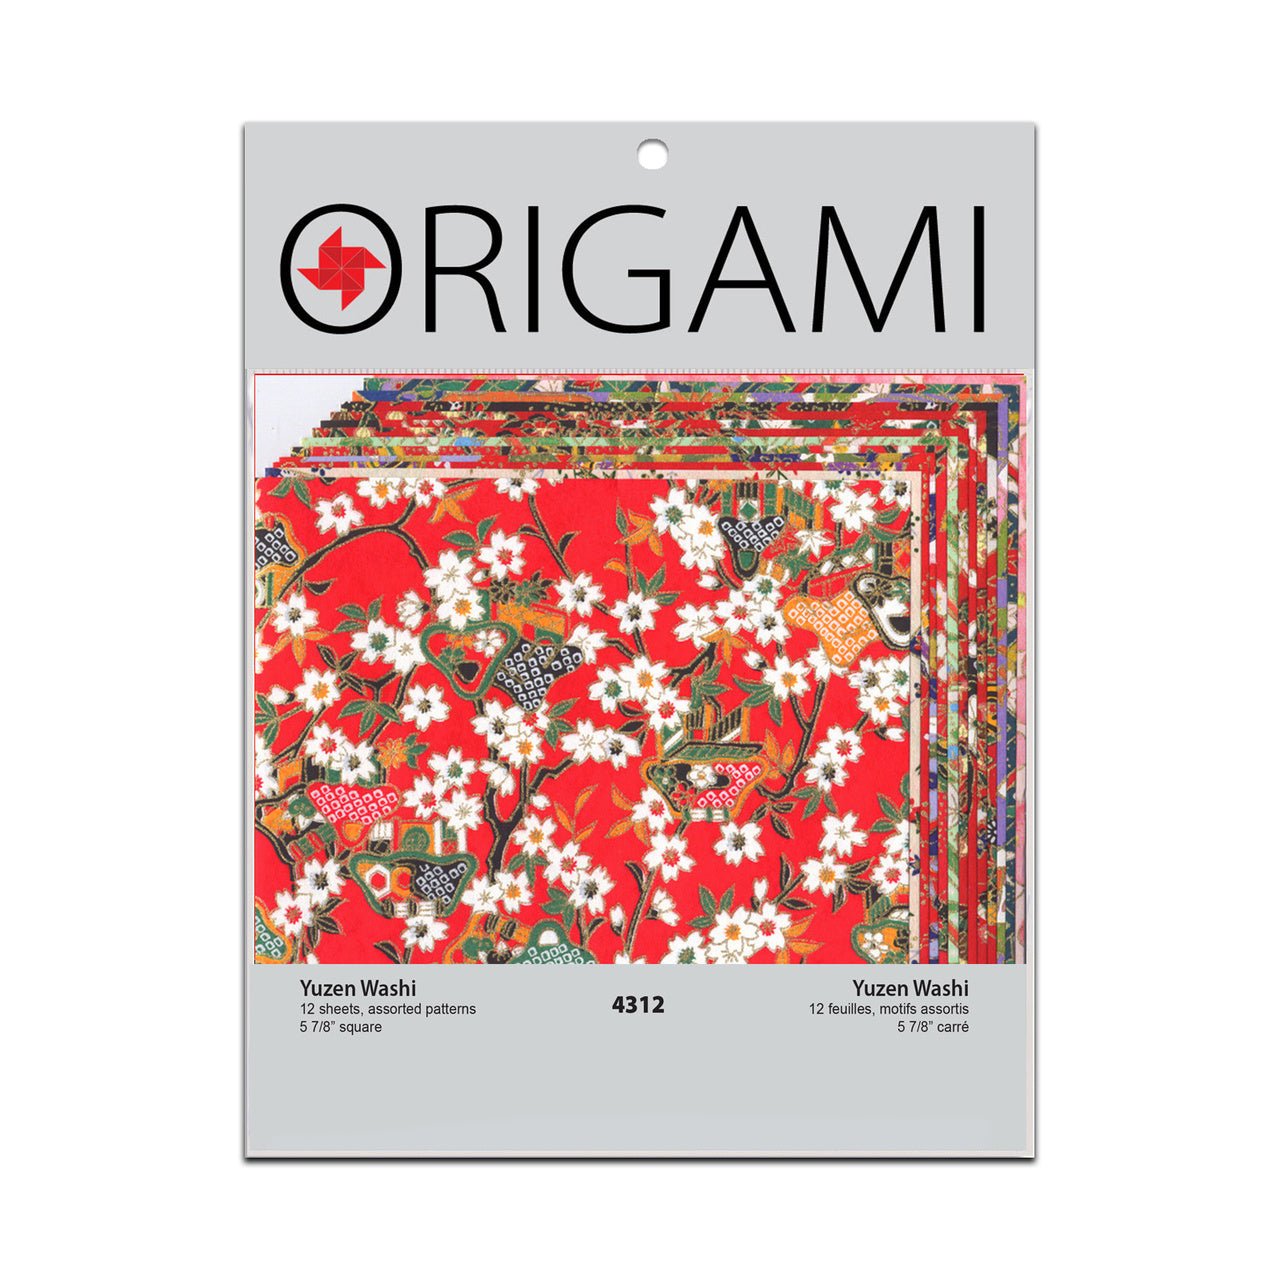 Aitoh Origami Paper 6-Inch x 6-Inch 24 Sheets-Writing Theme